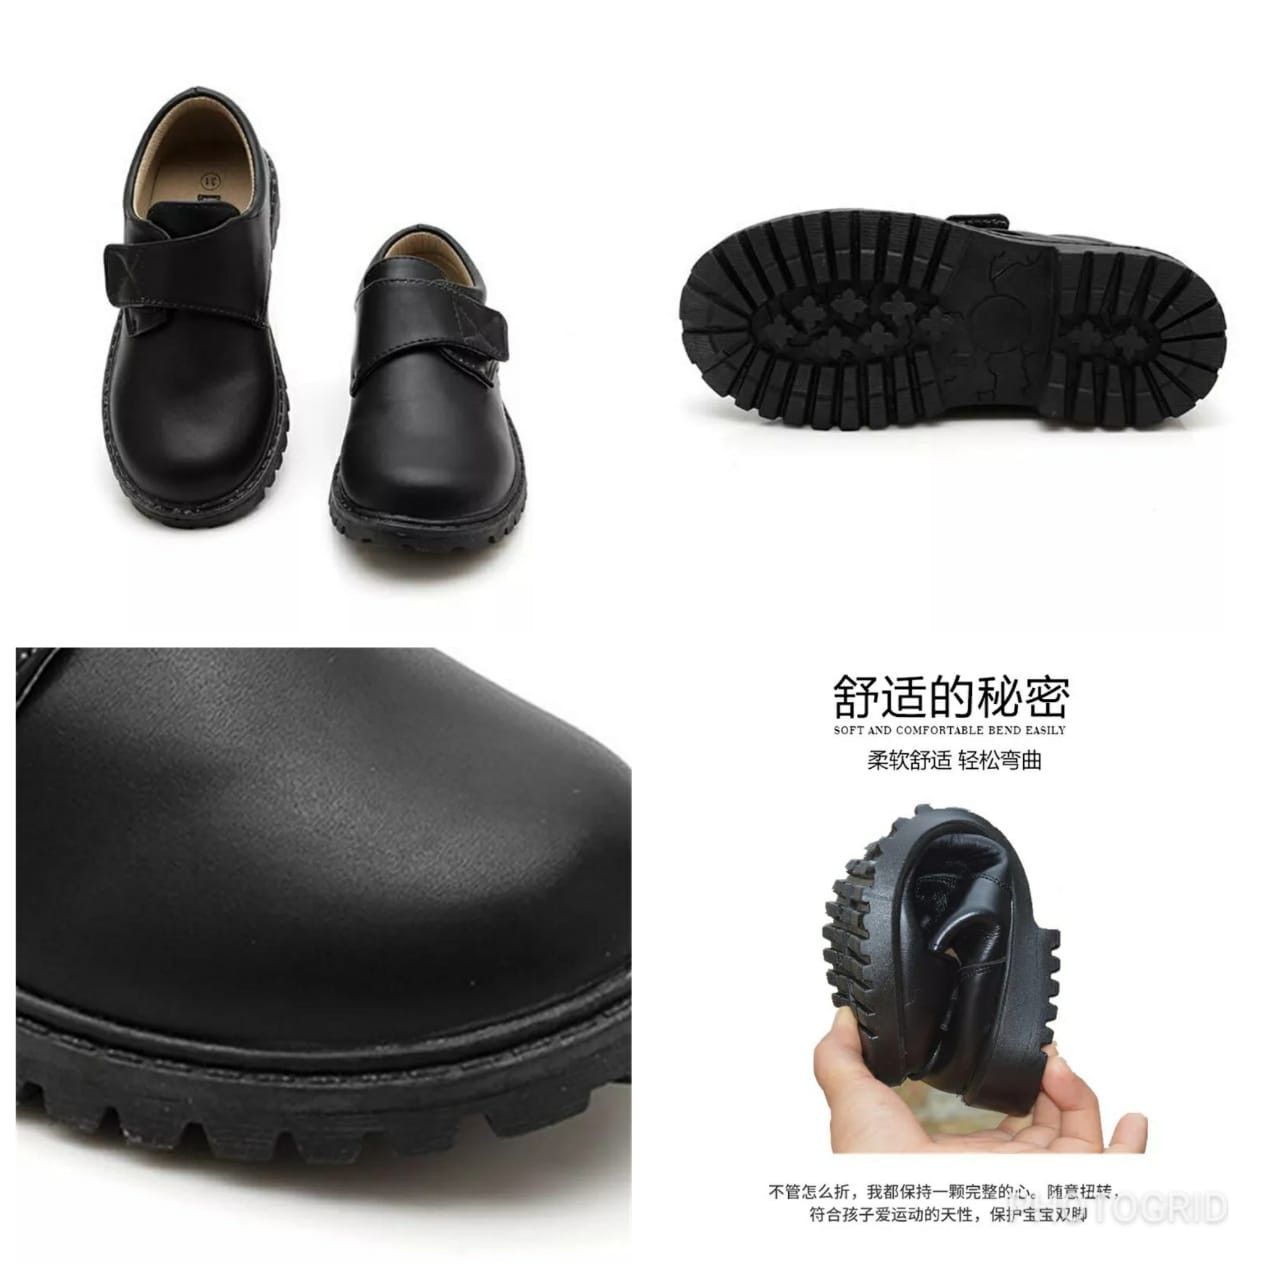 Boys leather shoes